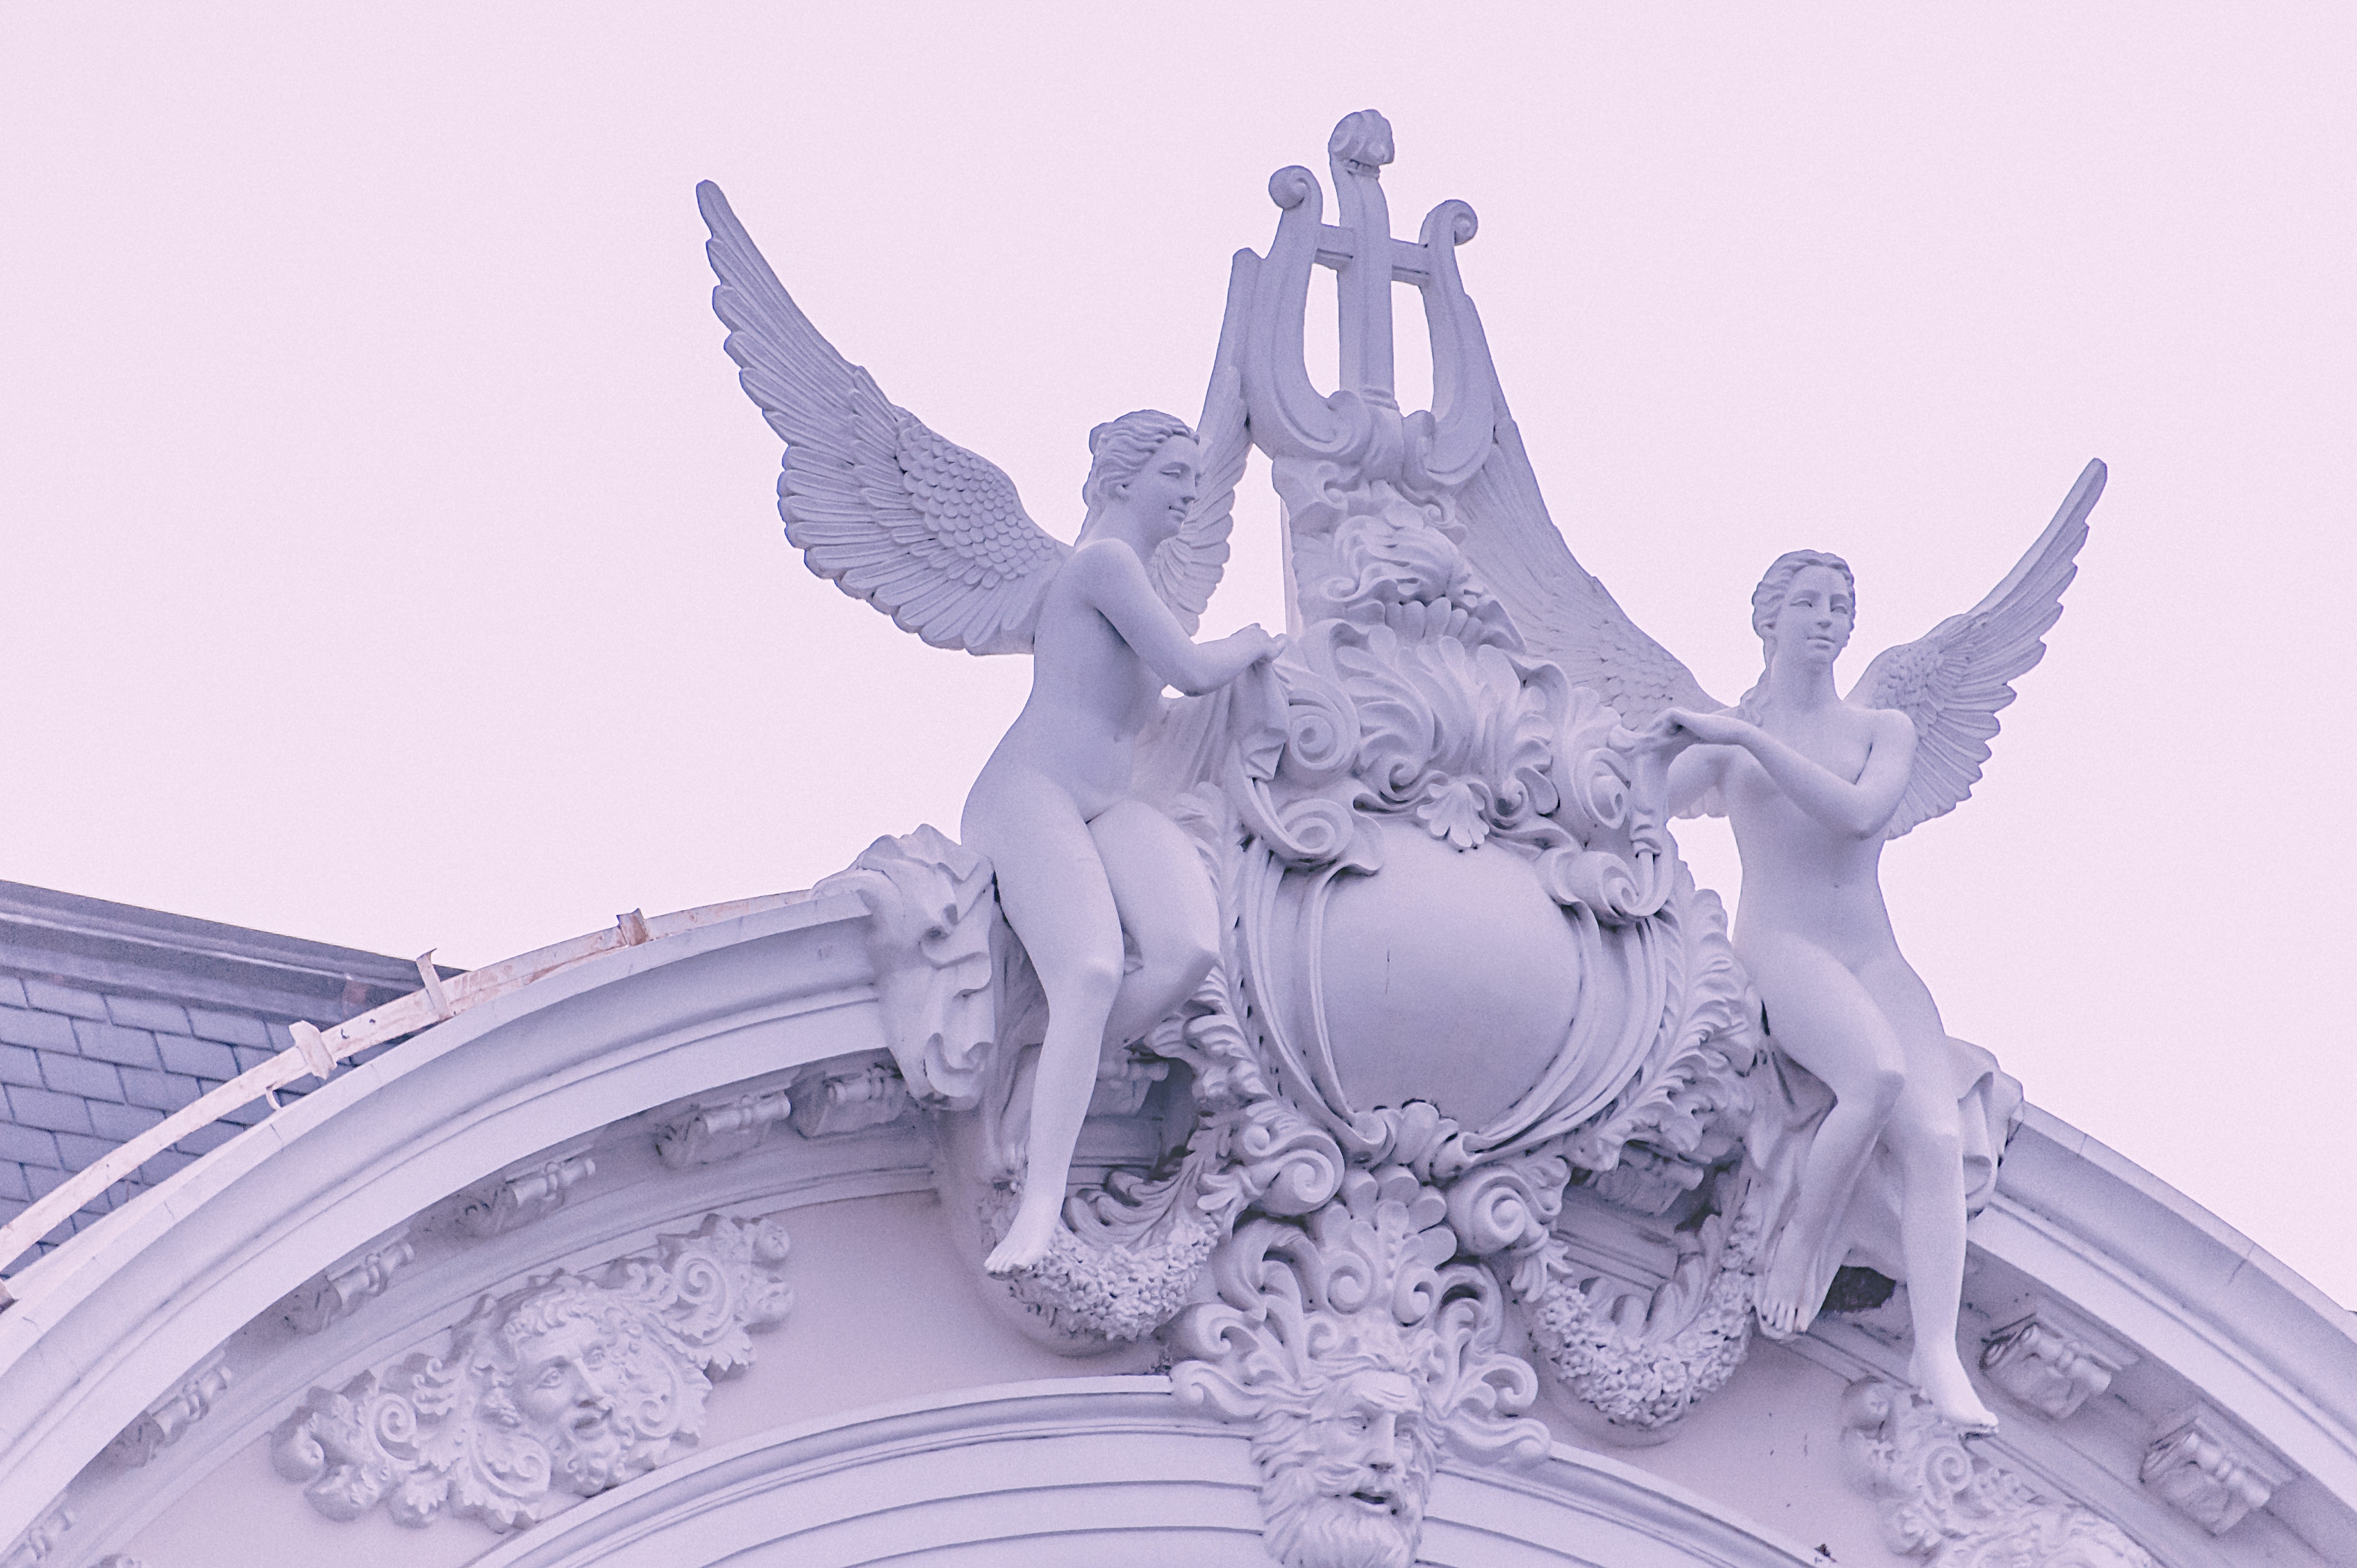 Two Sculptures Of Female Angels Above A Building